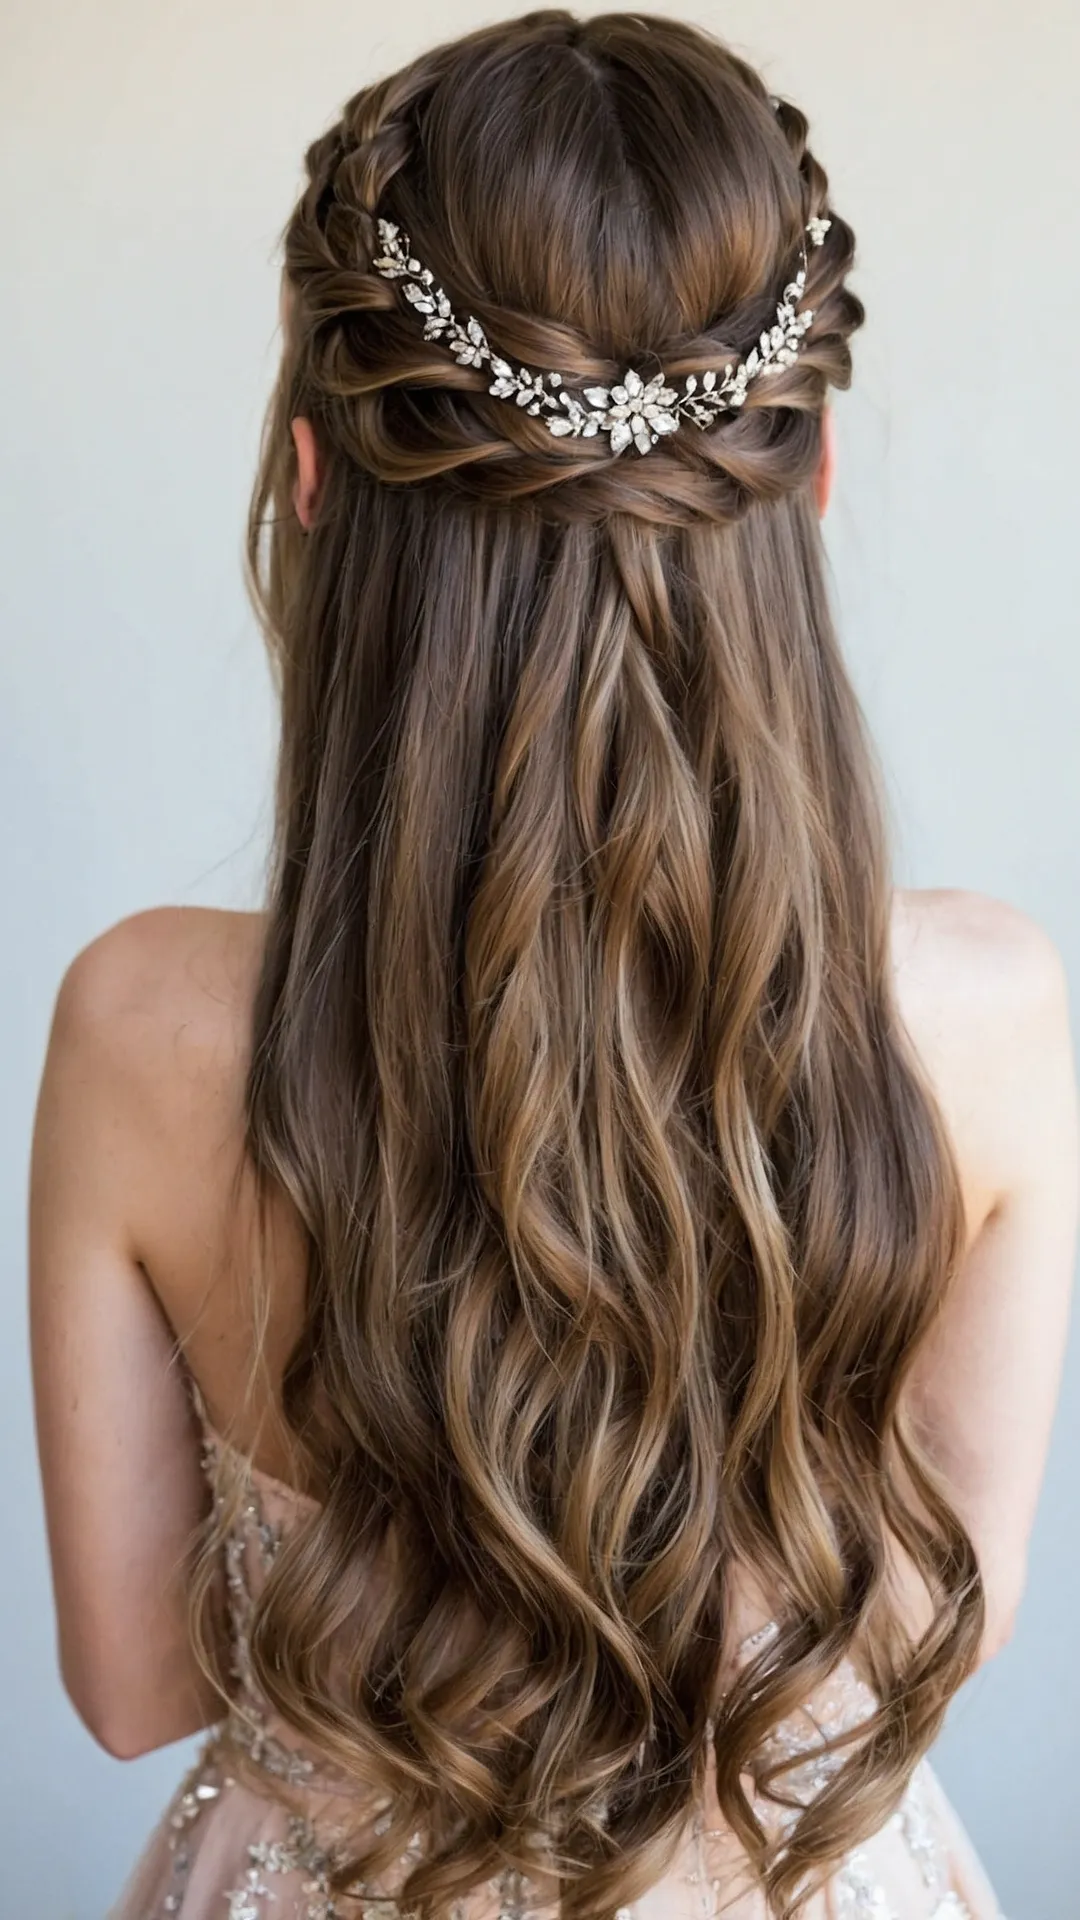 Regal Waves: Long Hair Prom Hairstyle Ideas